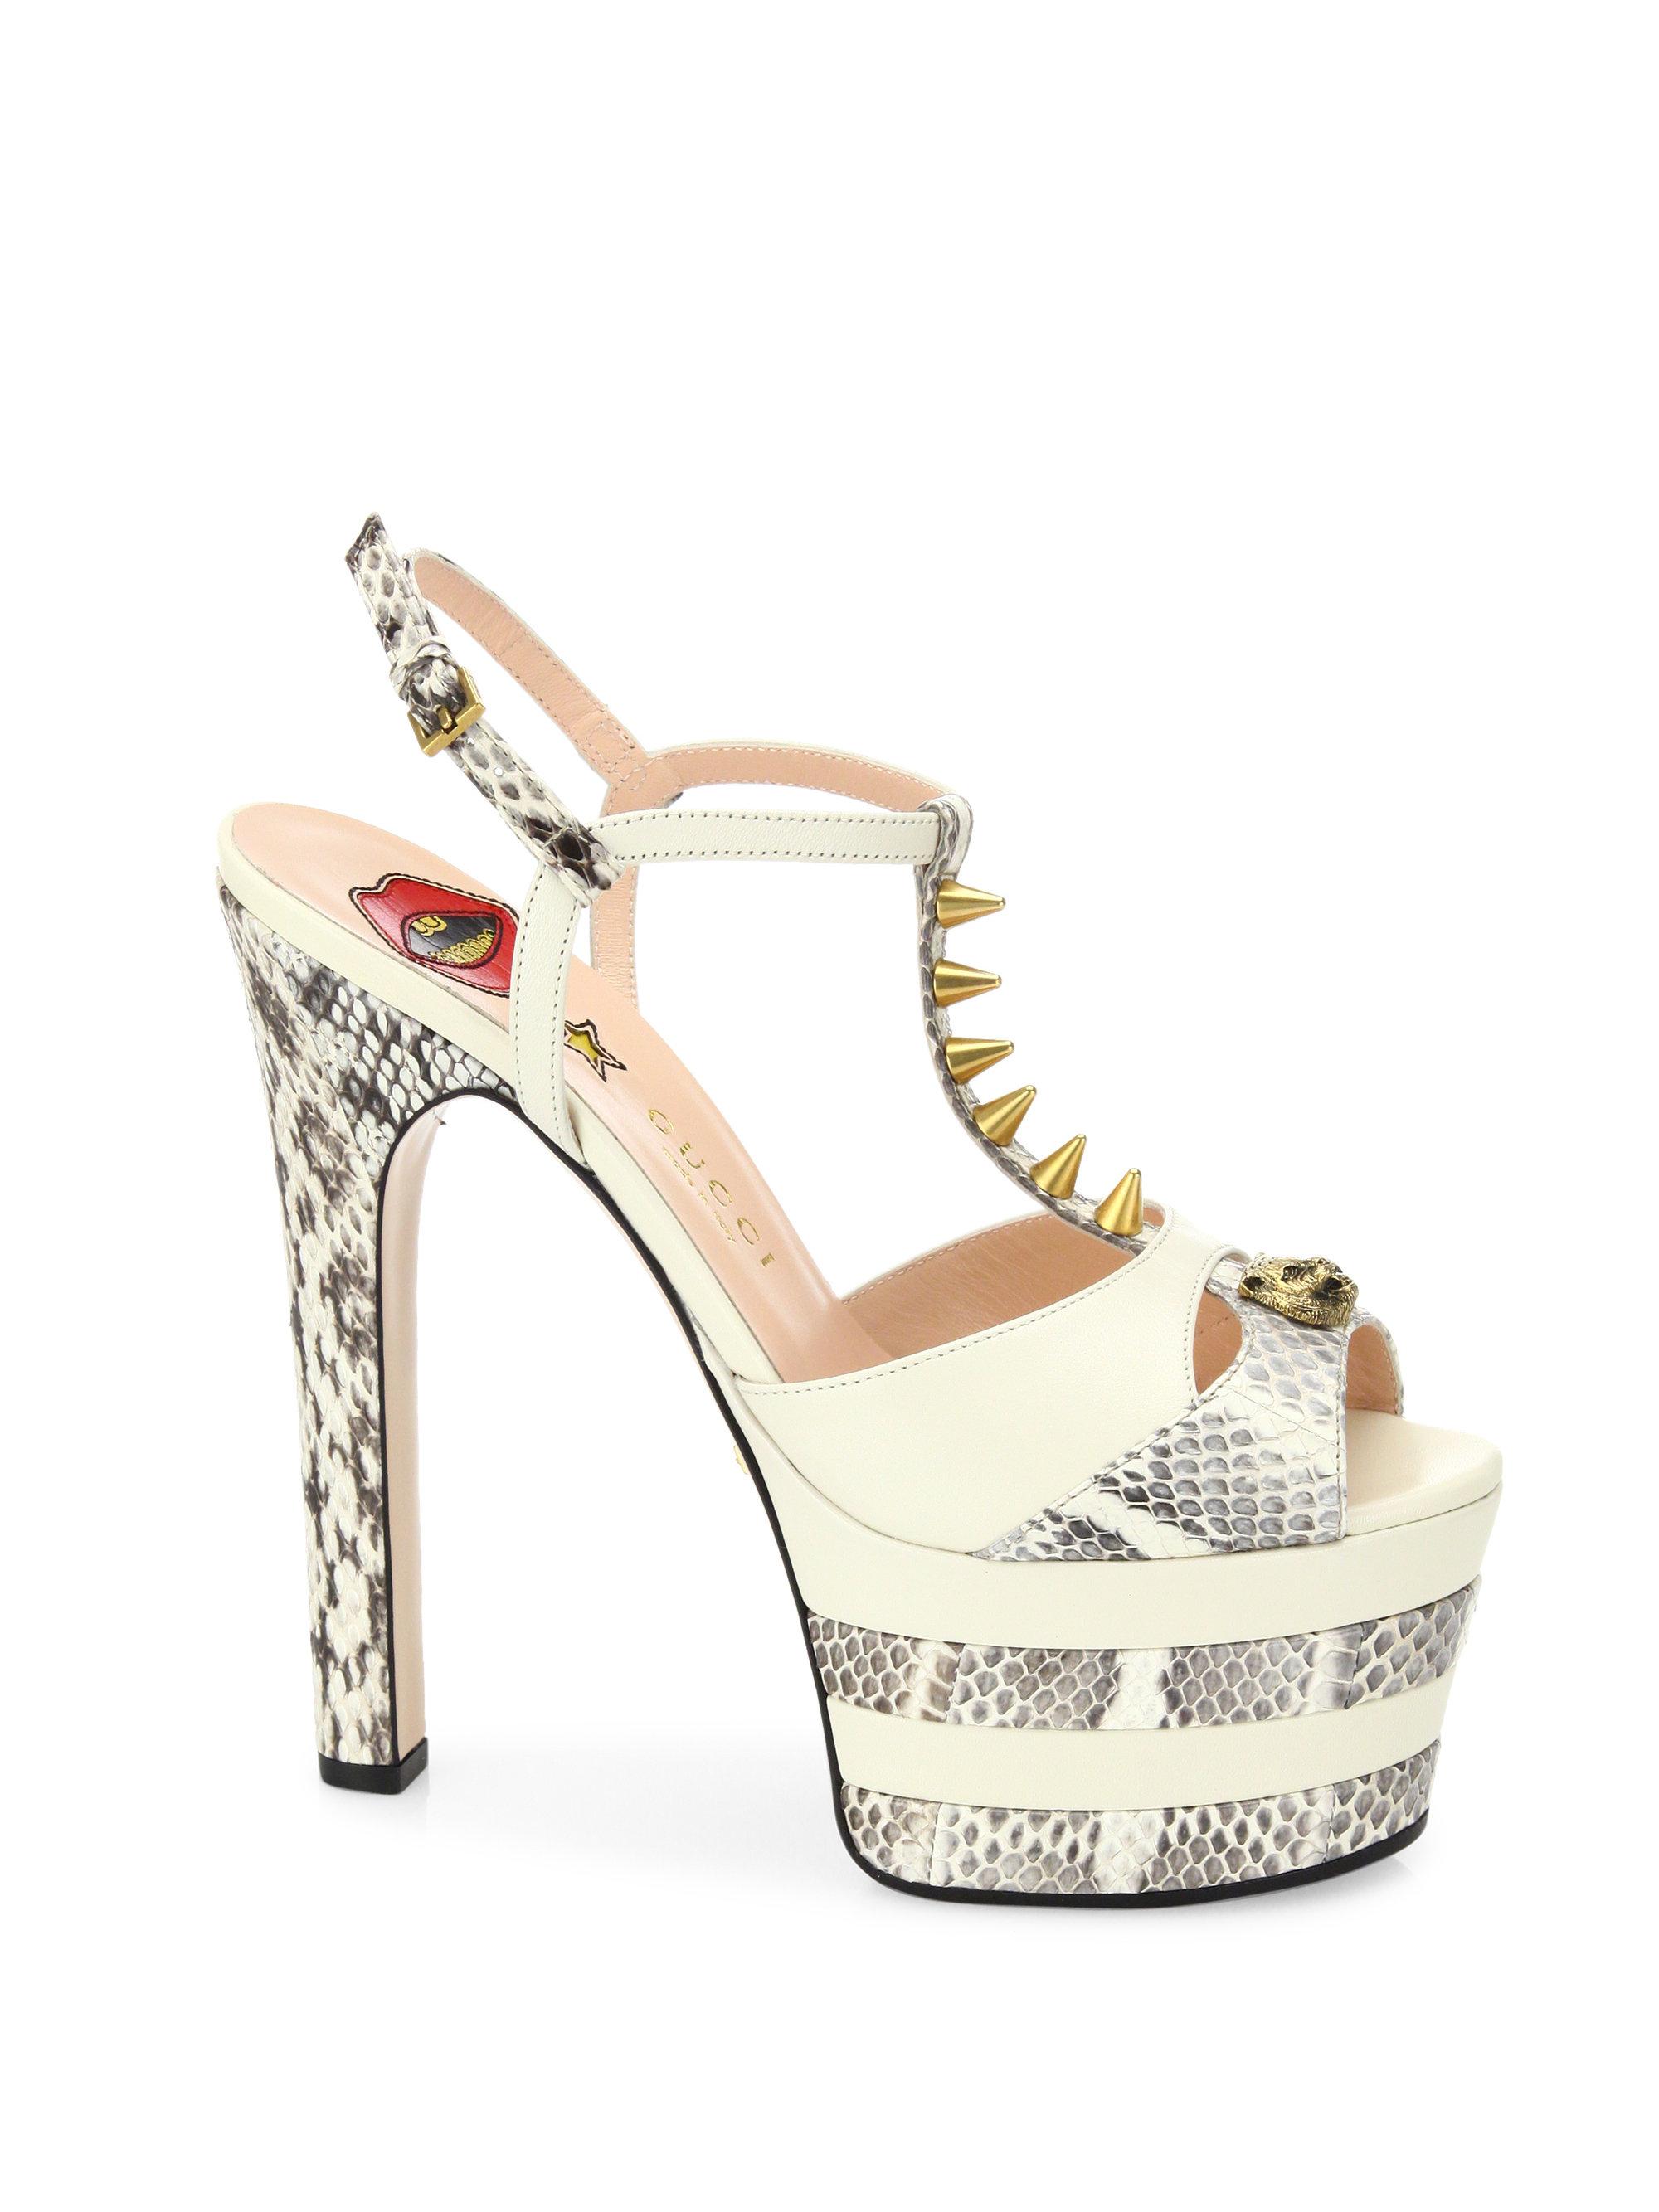 Gucci Angel Leather & Snakeskin Peep Toe Platform T-strap Sandals in White - Lyst